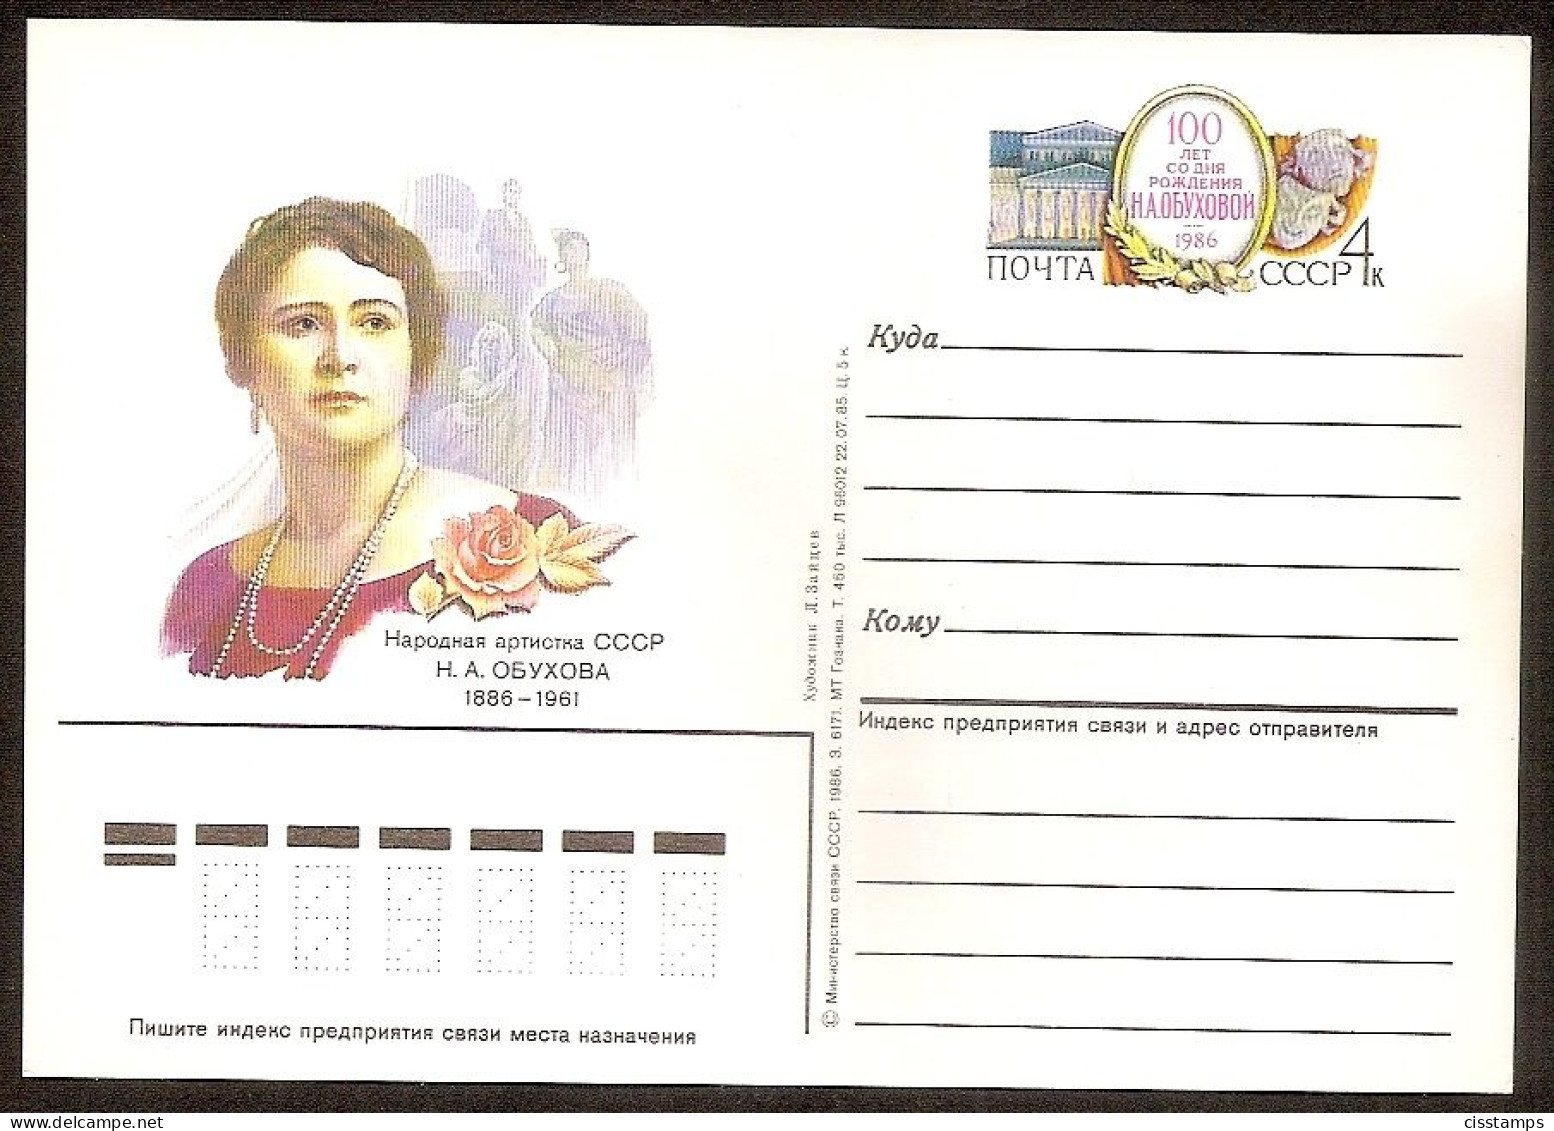 Russia USSR 1986●100th Anniv. Of N. Obuhova●Actress●●stamped Stationery●postal Card●Mi PSo155 - 1980-91